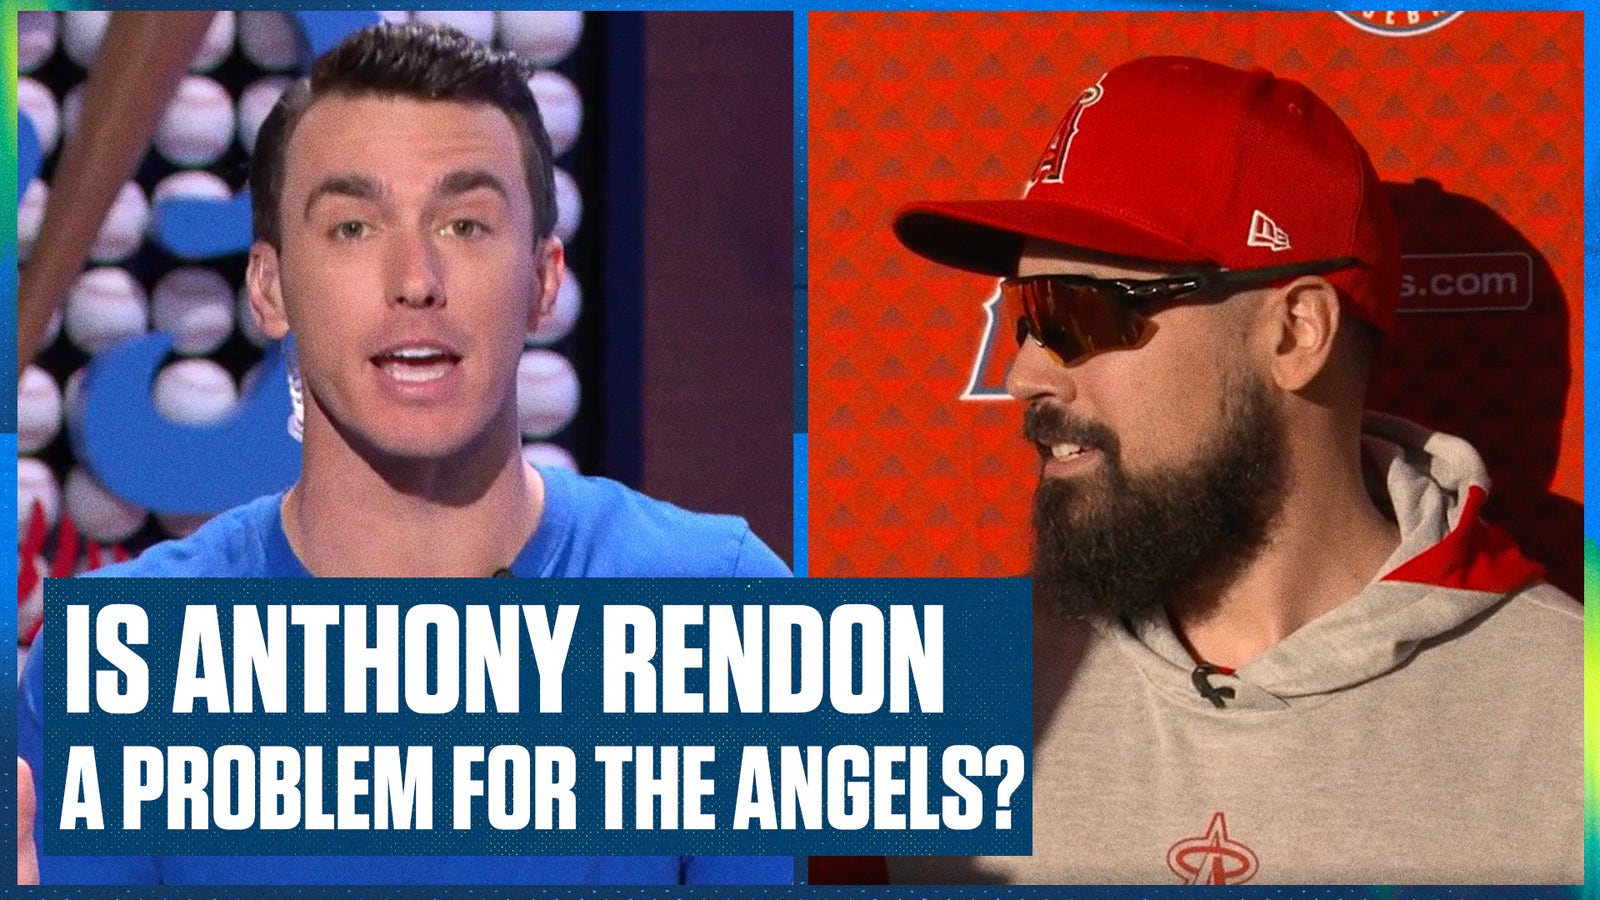 Can the Angels win with Anthony Rendon? 